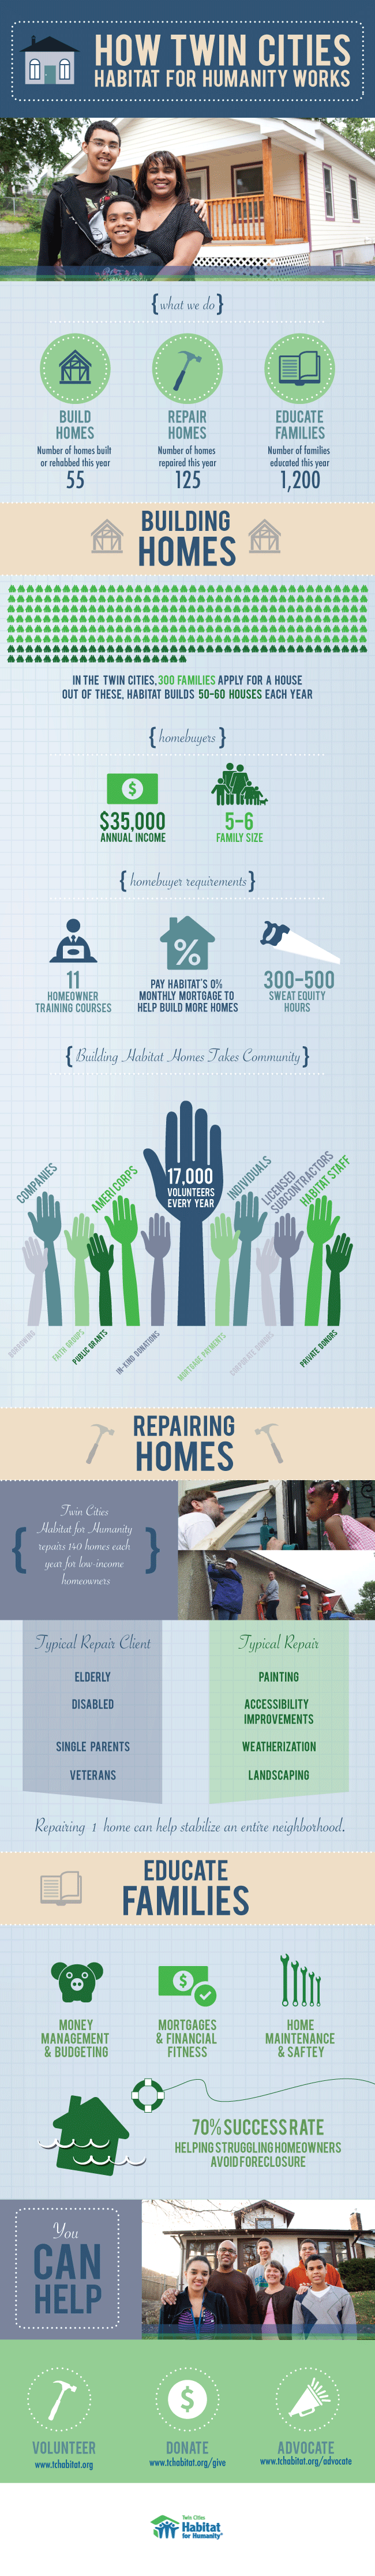 [Infographic] How Twin Cities Habitat for Humanity Works